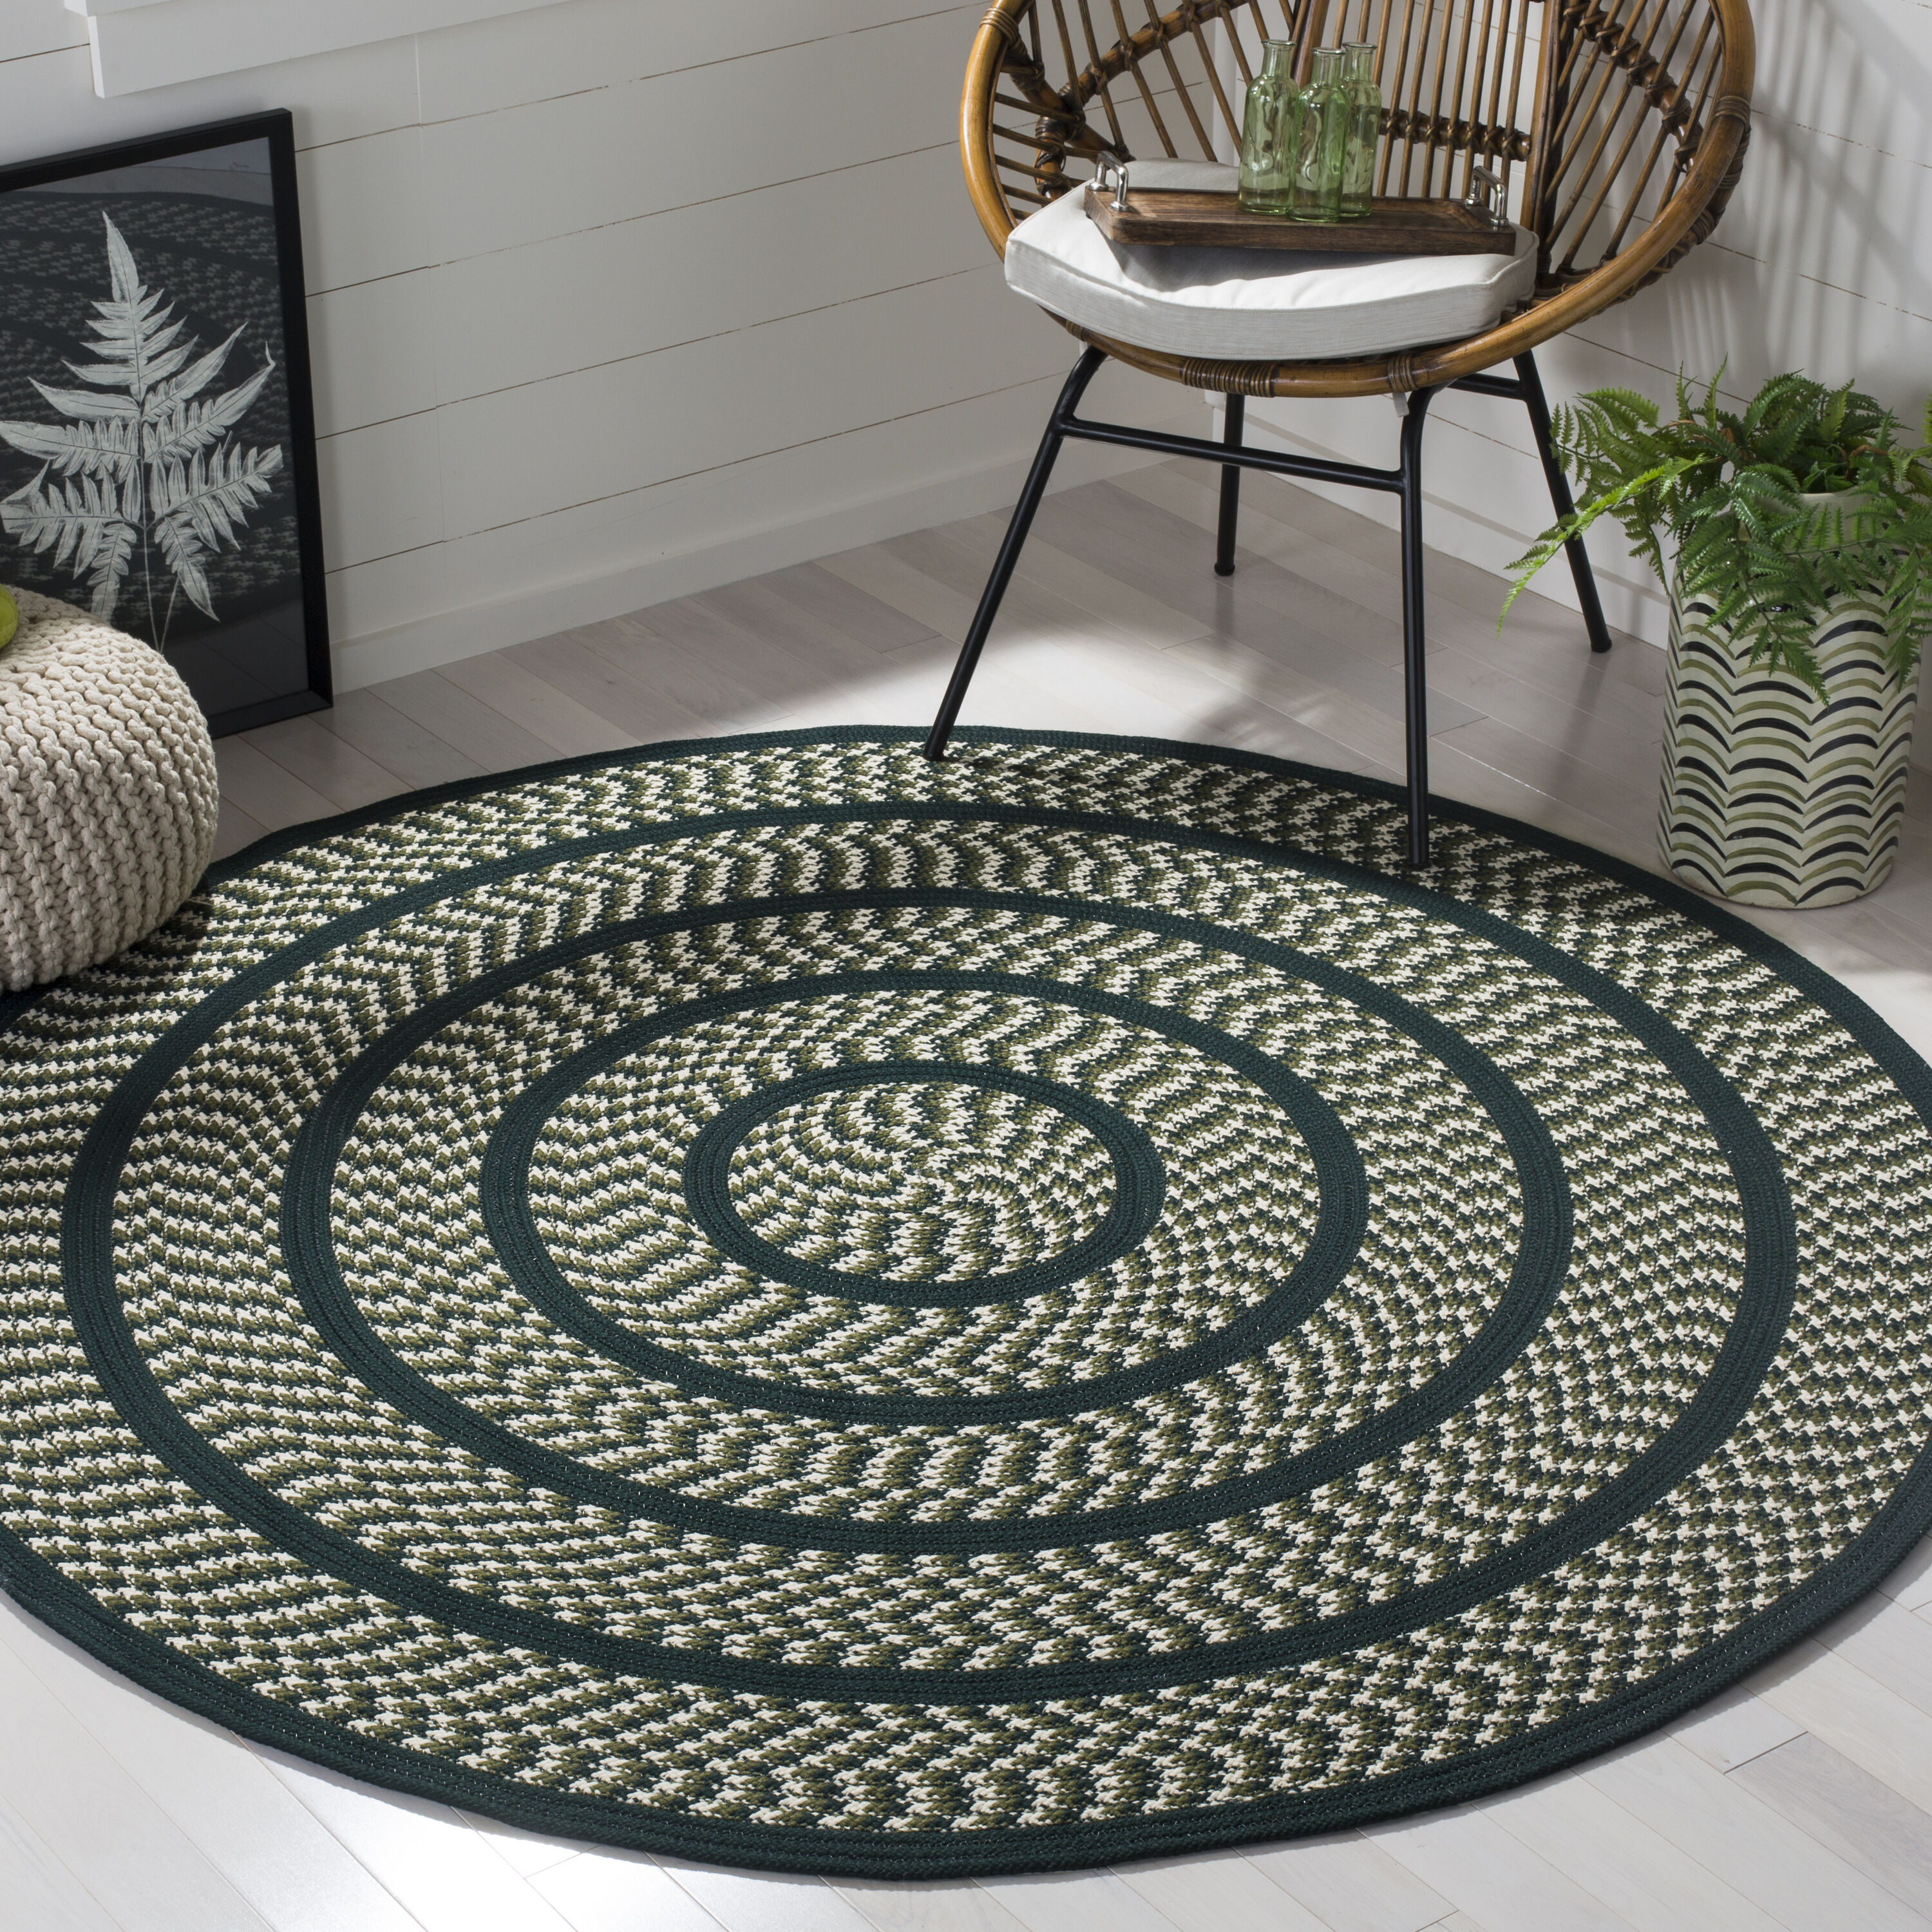 SAFAVIEH Braided Collection Area Rug - 5' x 8' Oval, Multi, Handmade  Country